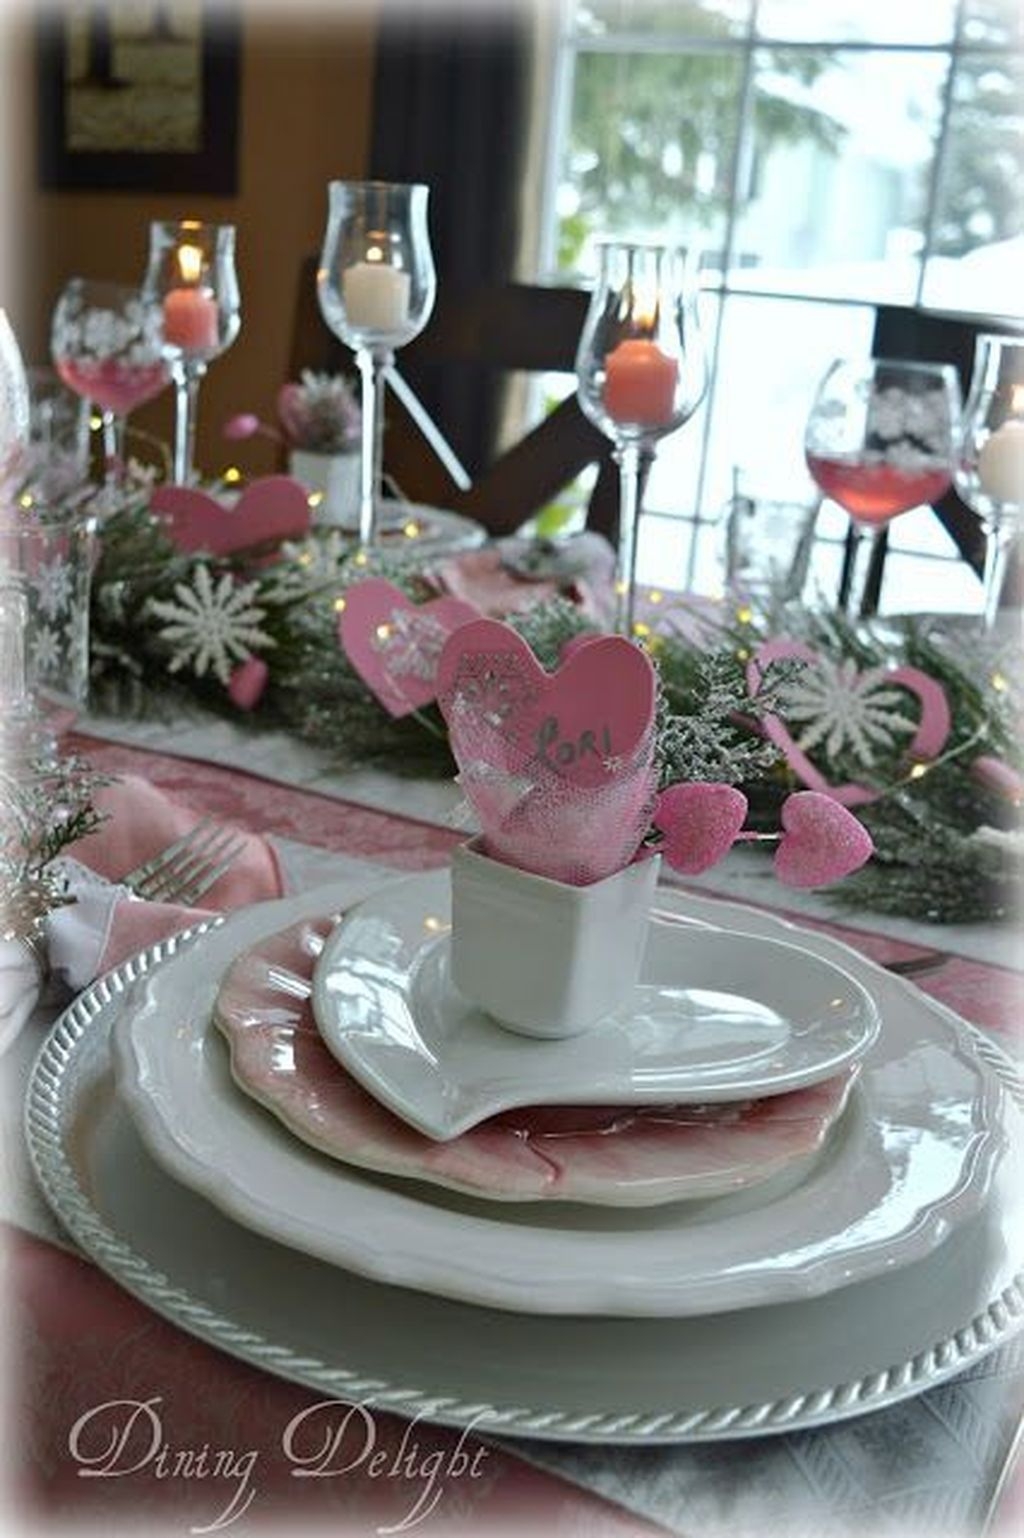 Perfect Valentine’s Day Romantic Dining Table Decor Ideas For Two People 17